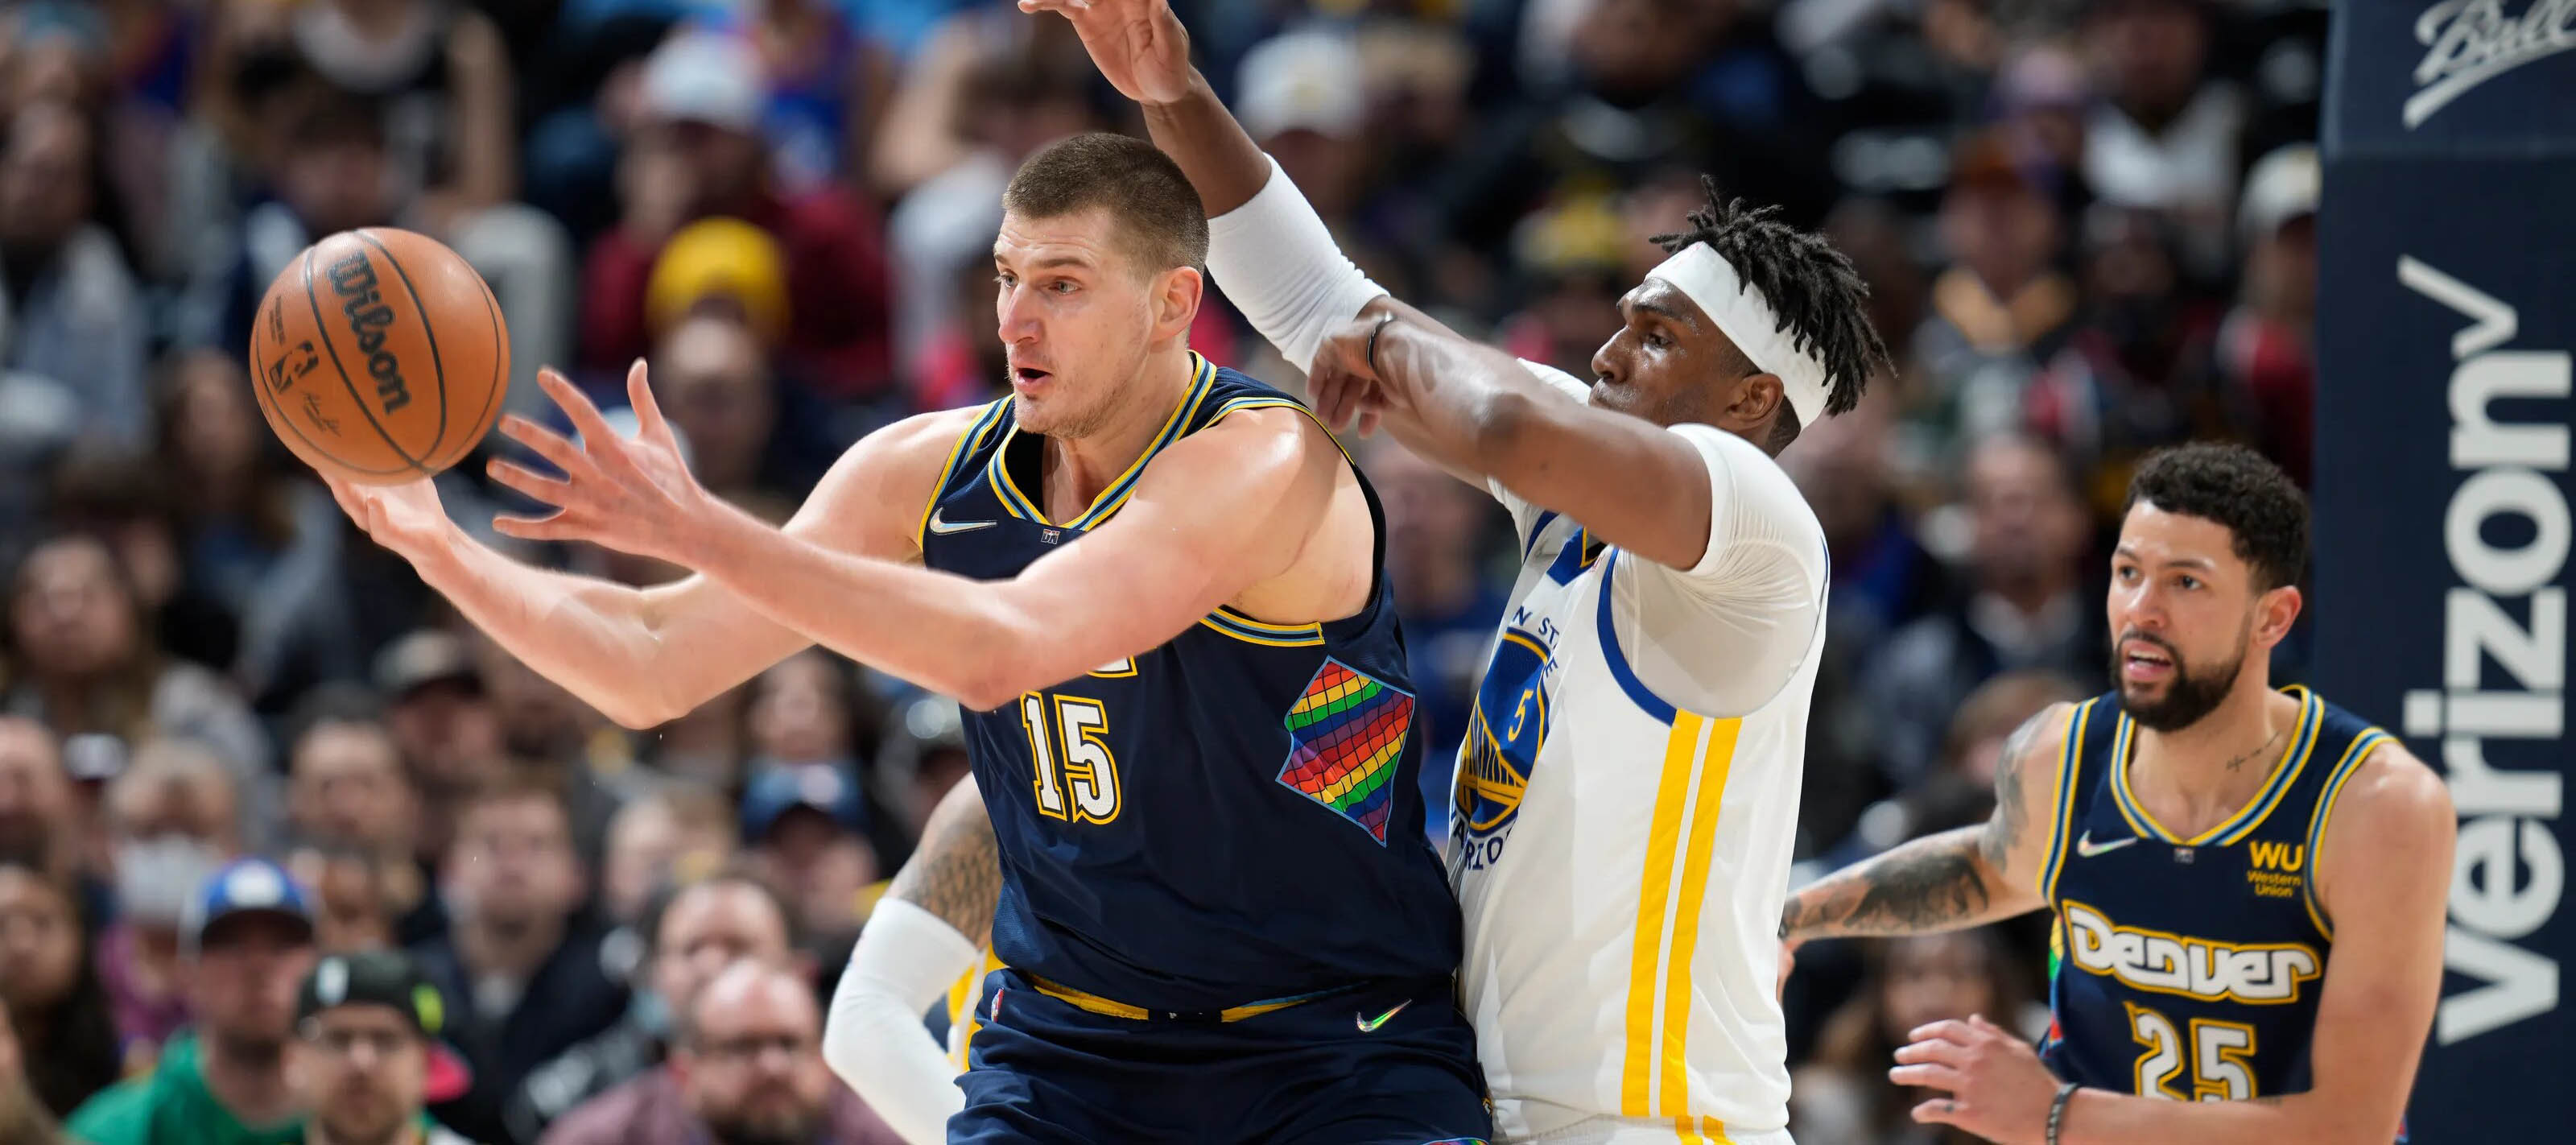 NBA Playoffs Parlay Betting Picks 2022 Conferences Games to Wager On this Week